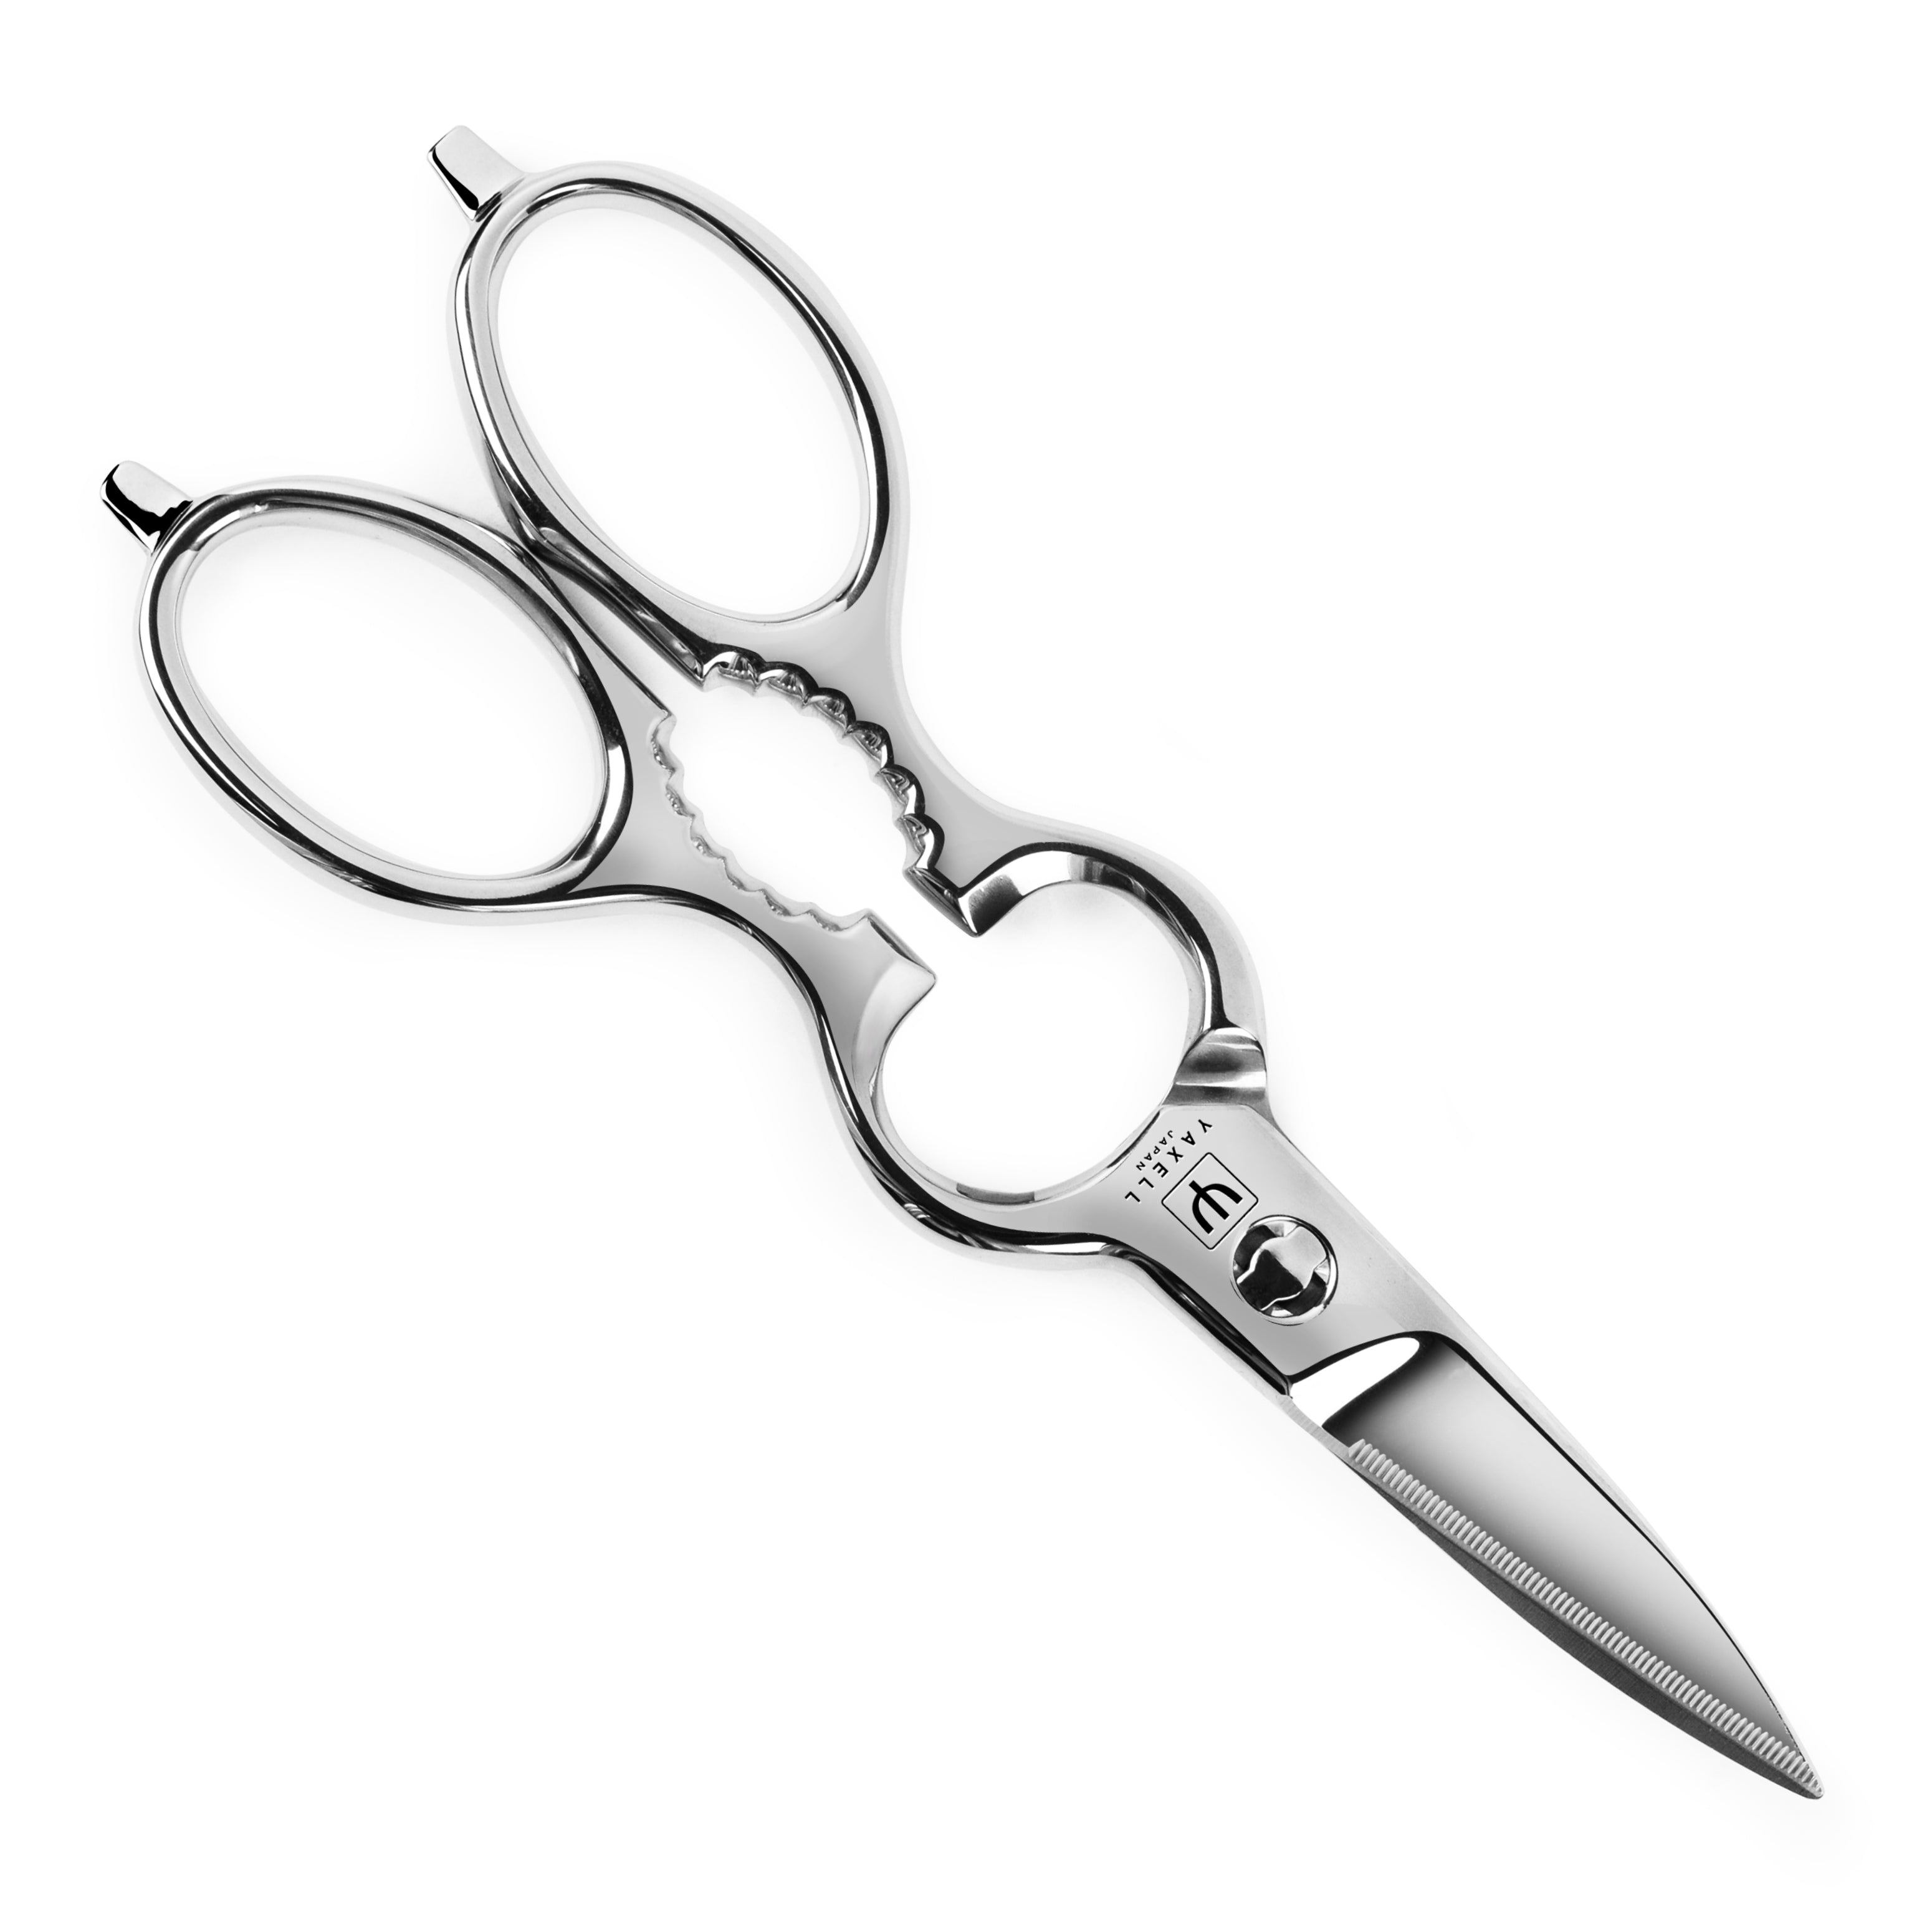 Yaxell Stainless Steel Kitchen Shears – Cutlery and More